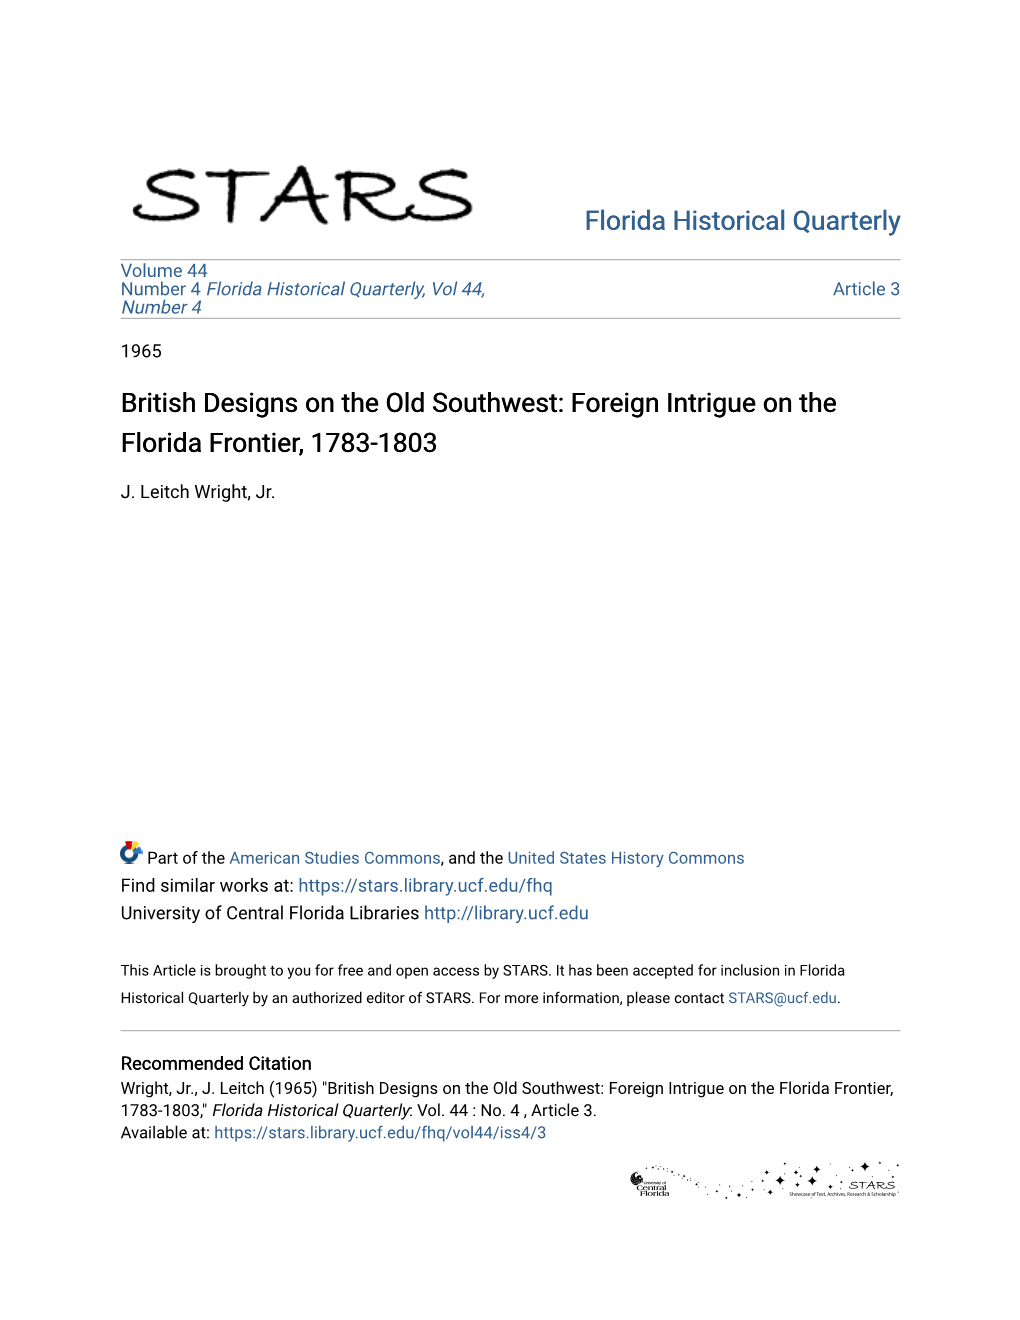 British Designs on the Old Southwest: Foreign Intrigue on the Florida Frontier, 1783-1803